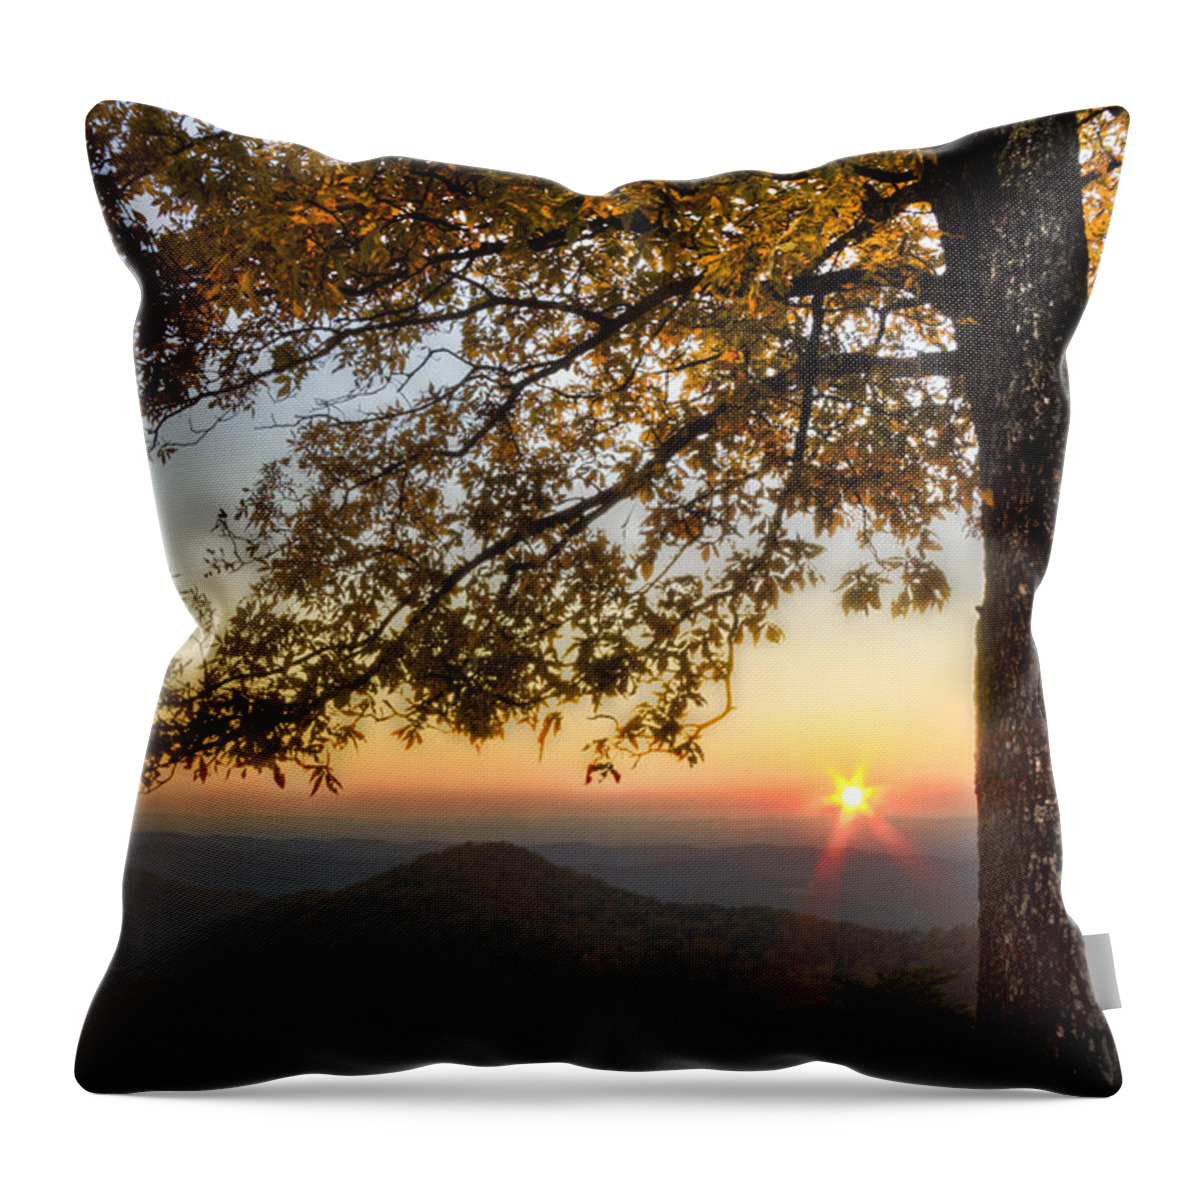 Appalachia Throw Pillow featuring the photograph Golden Lights by Debra and Dave Vanderlaan